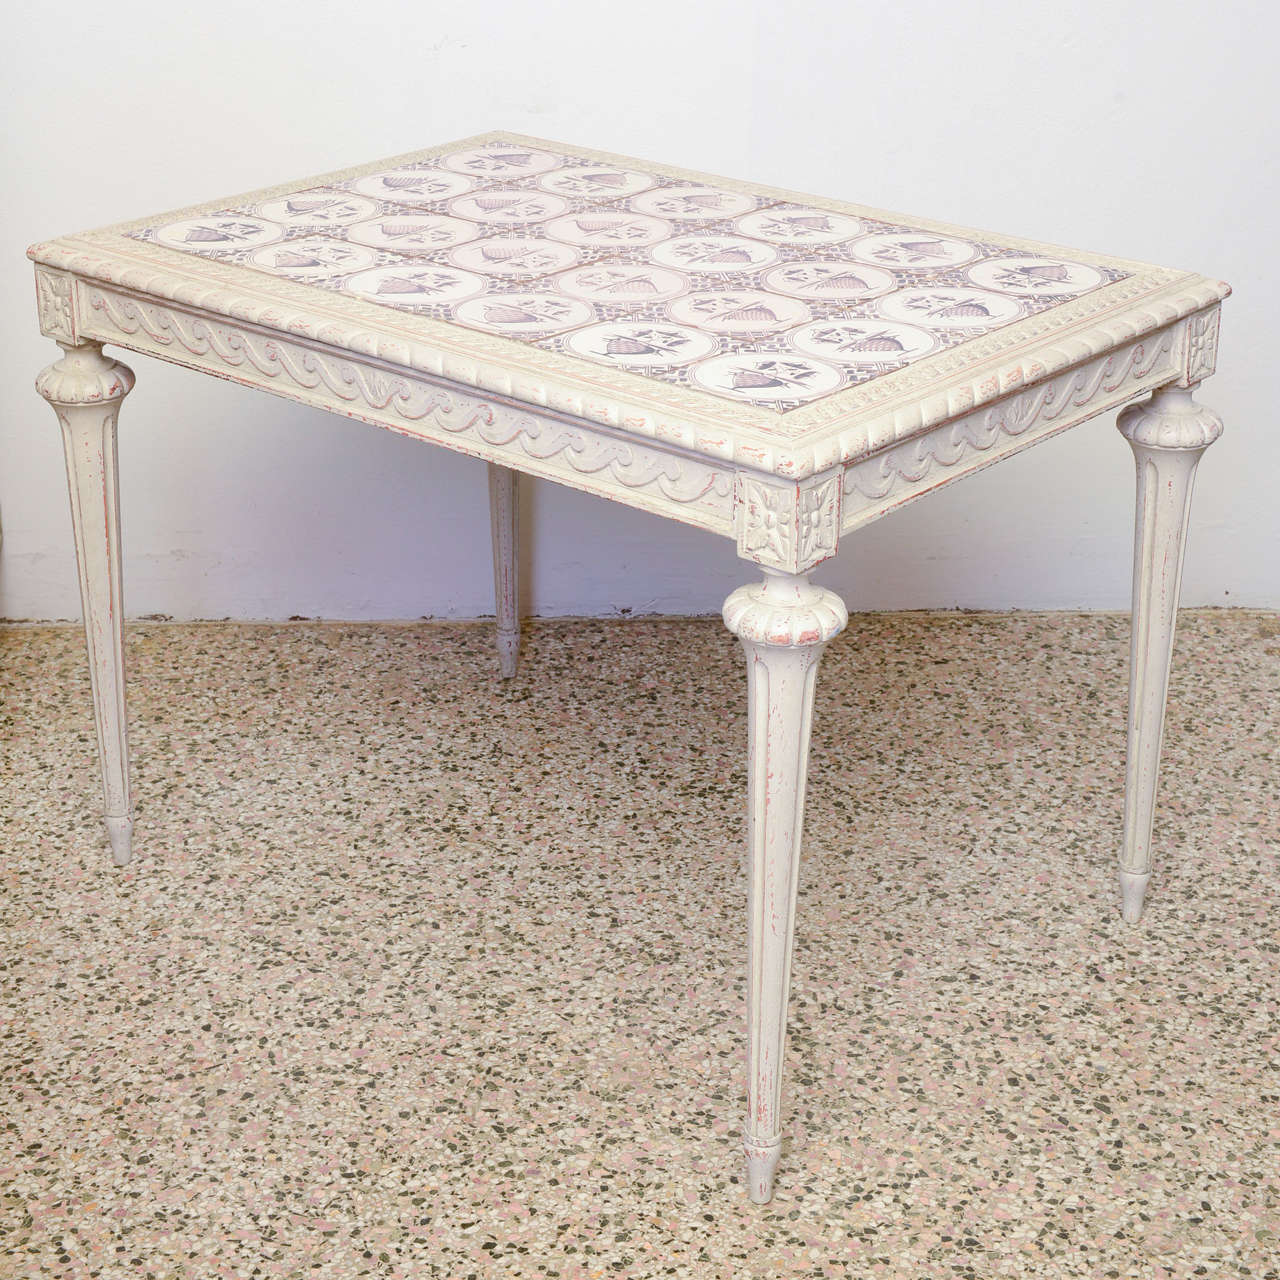 19th Century Swedish antique table with beautiful individual inset ceramic tiles; exquisite carvings surround the edge of table top, which sits on graceful tapered and fluted legs. Painted in whitish-gray distressed paint finish.

Circa Late 19th